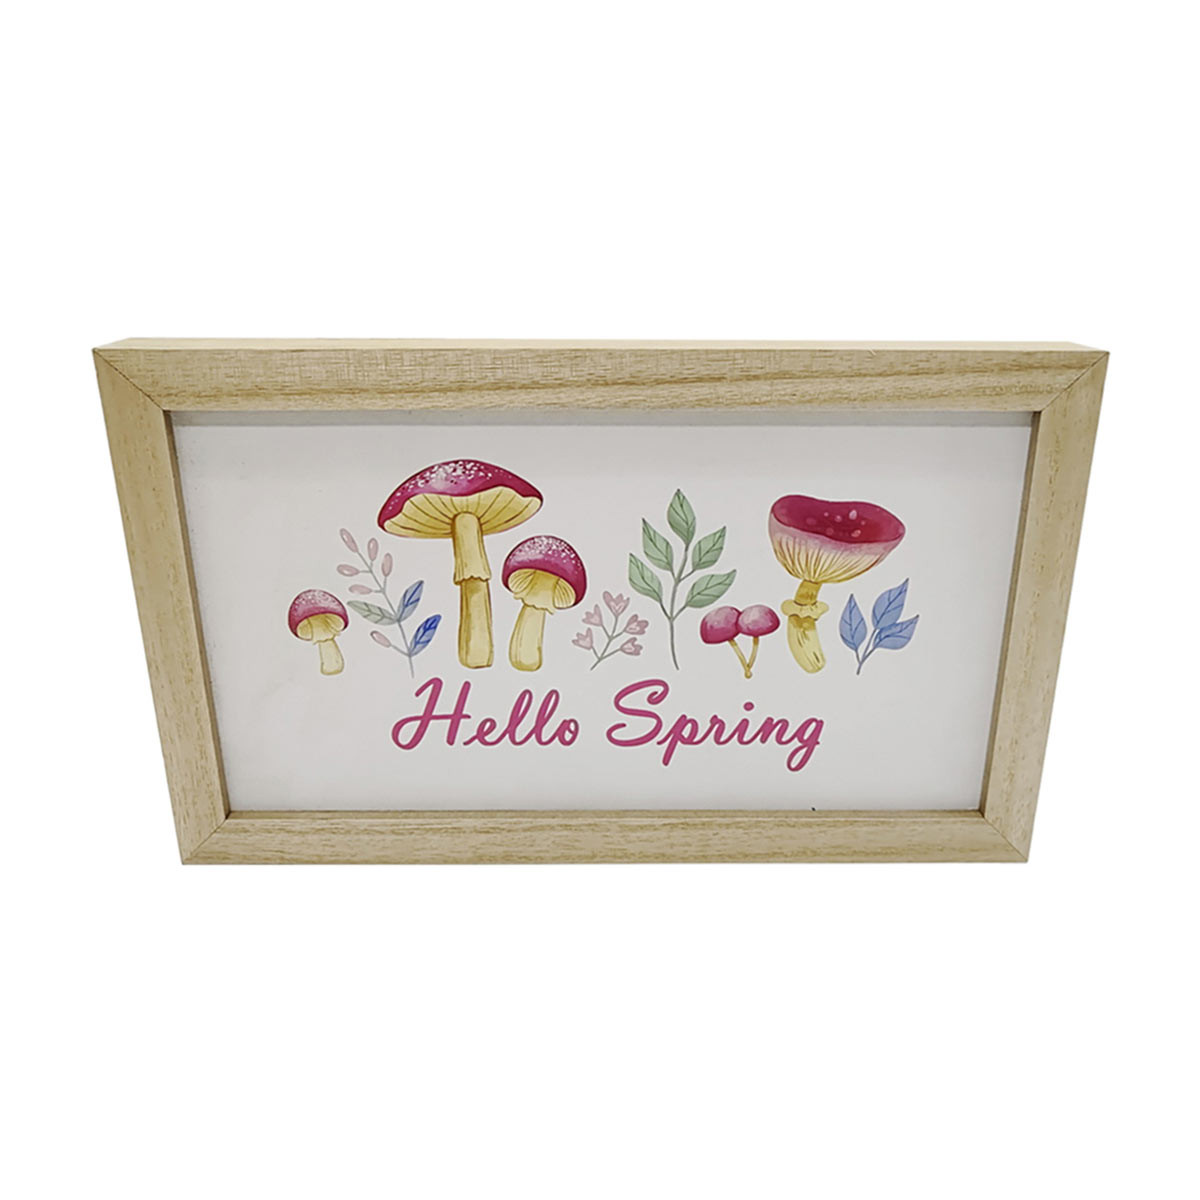 Hello Spring' Easter Wooden Wall Art